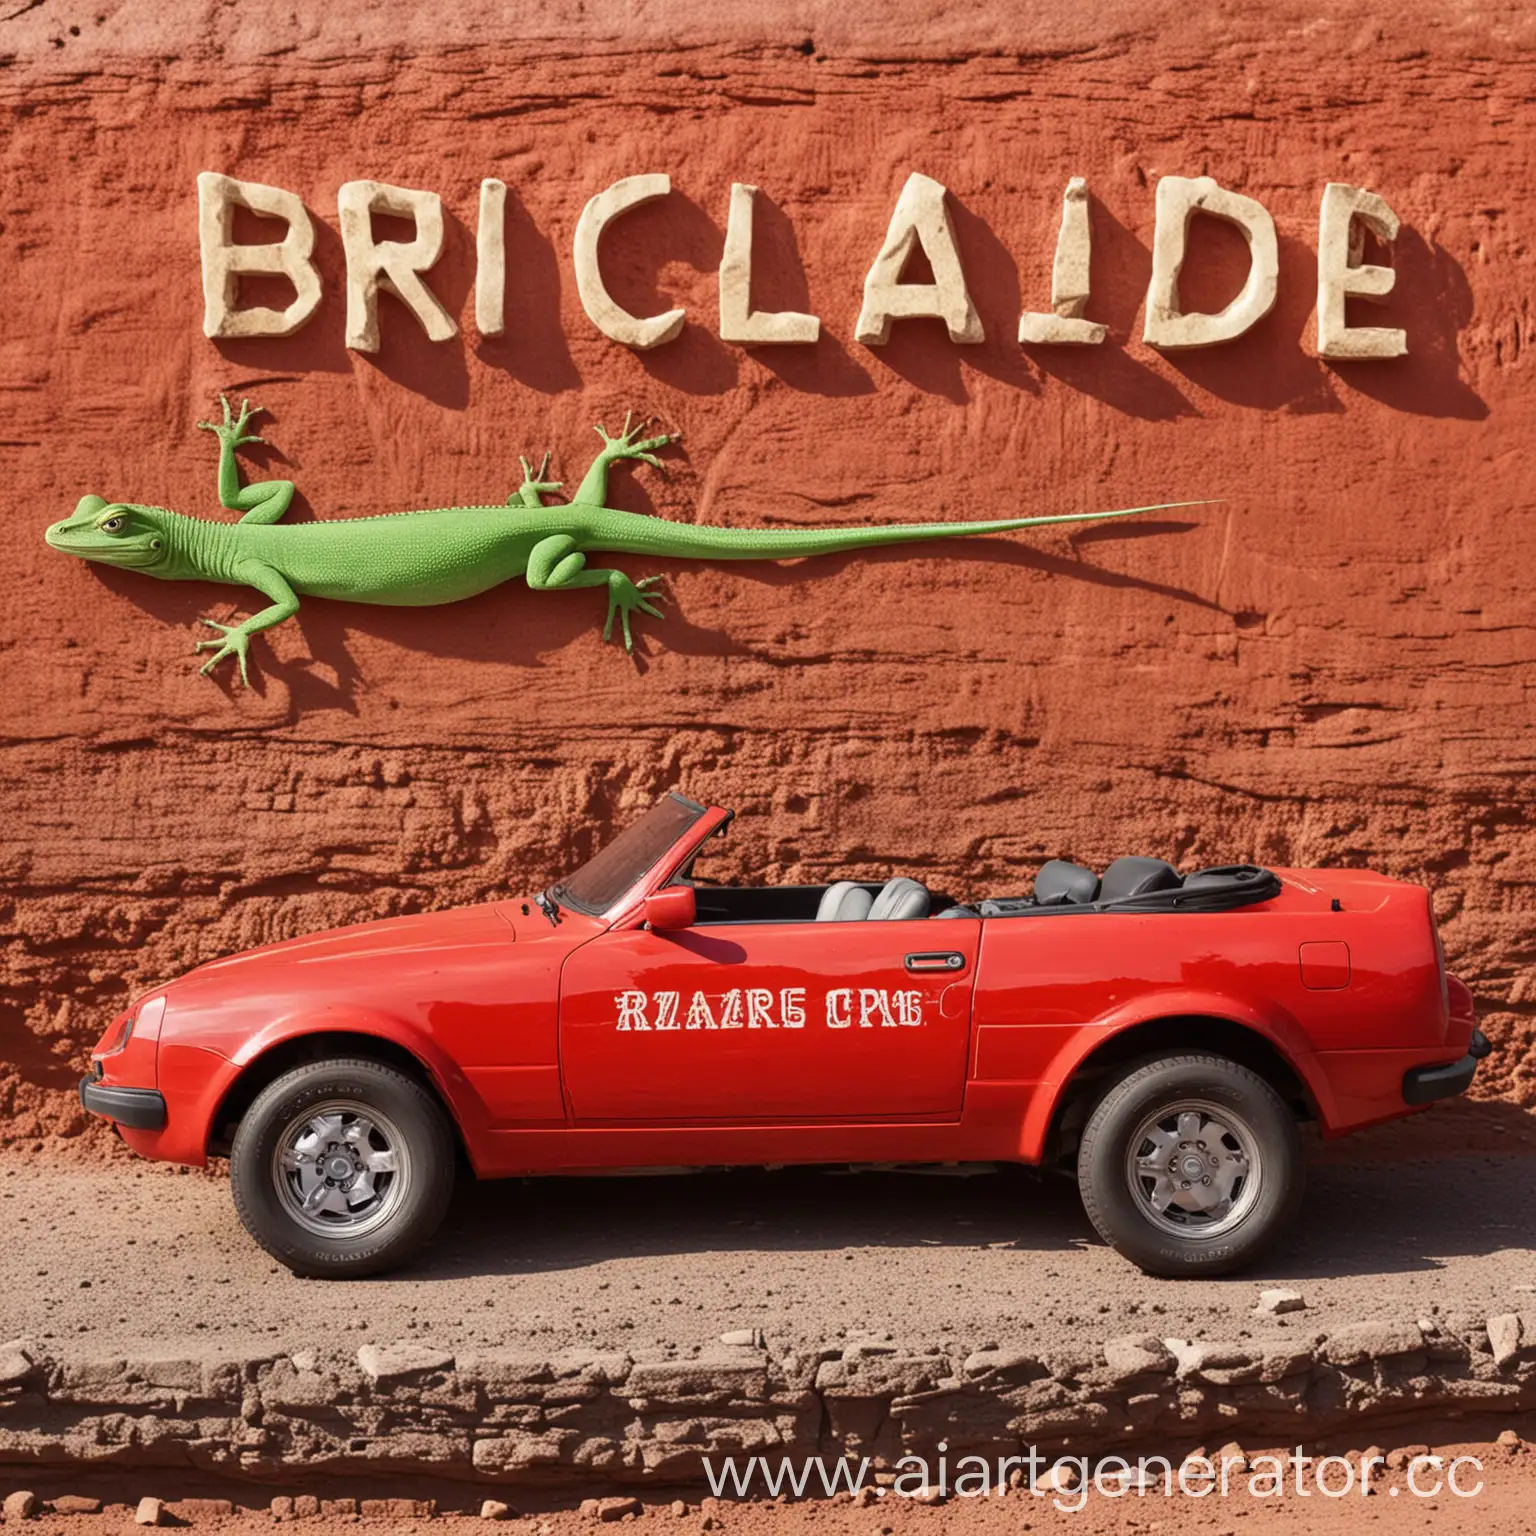 Vibrant-Red-Car-with-a-Playful-Lizard-and-RIDGE-Inscription